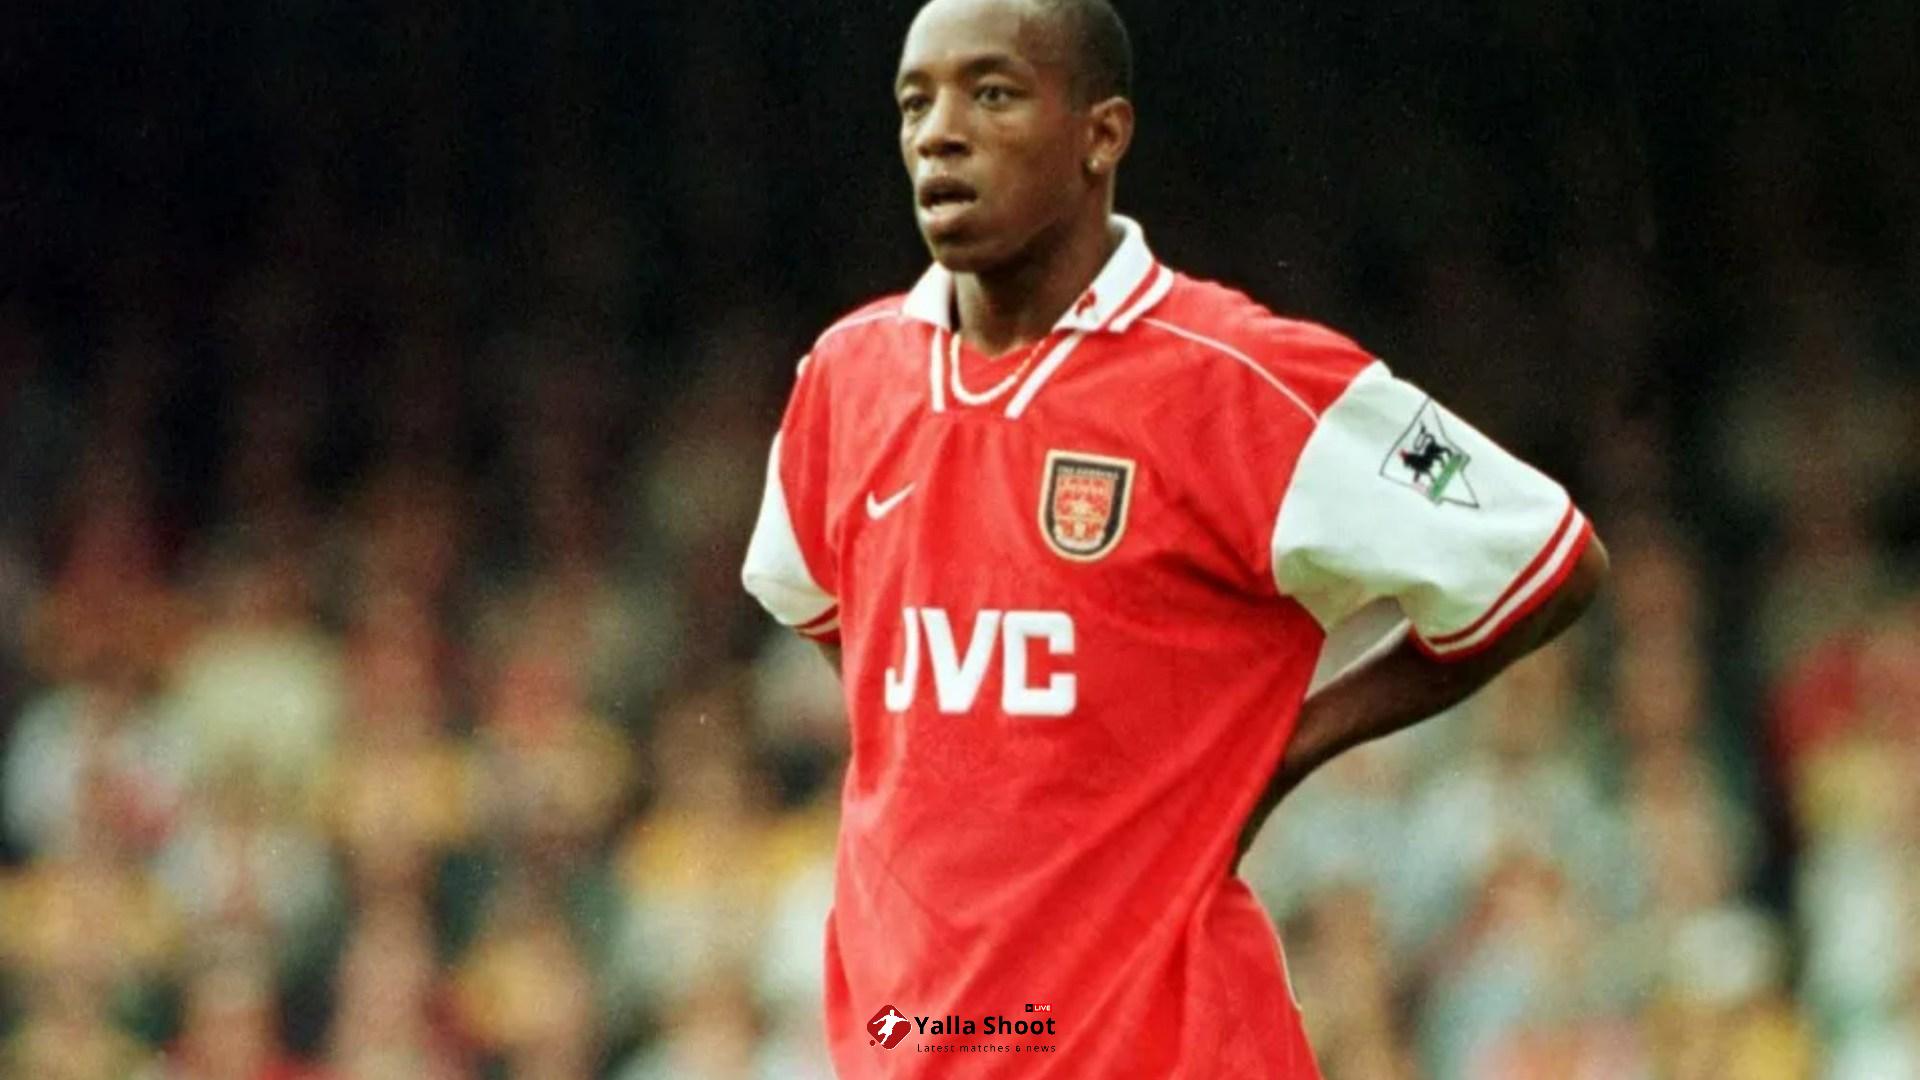 I played with Ian Wright at Arsenal for six years... he used to go ballistic and fight rival players in changing rooms